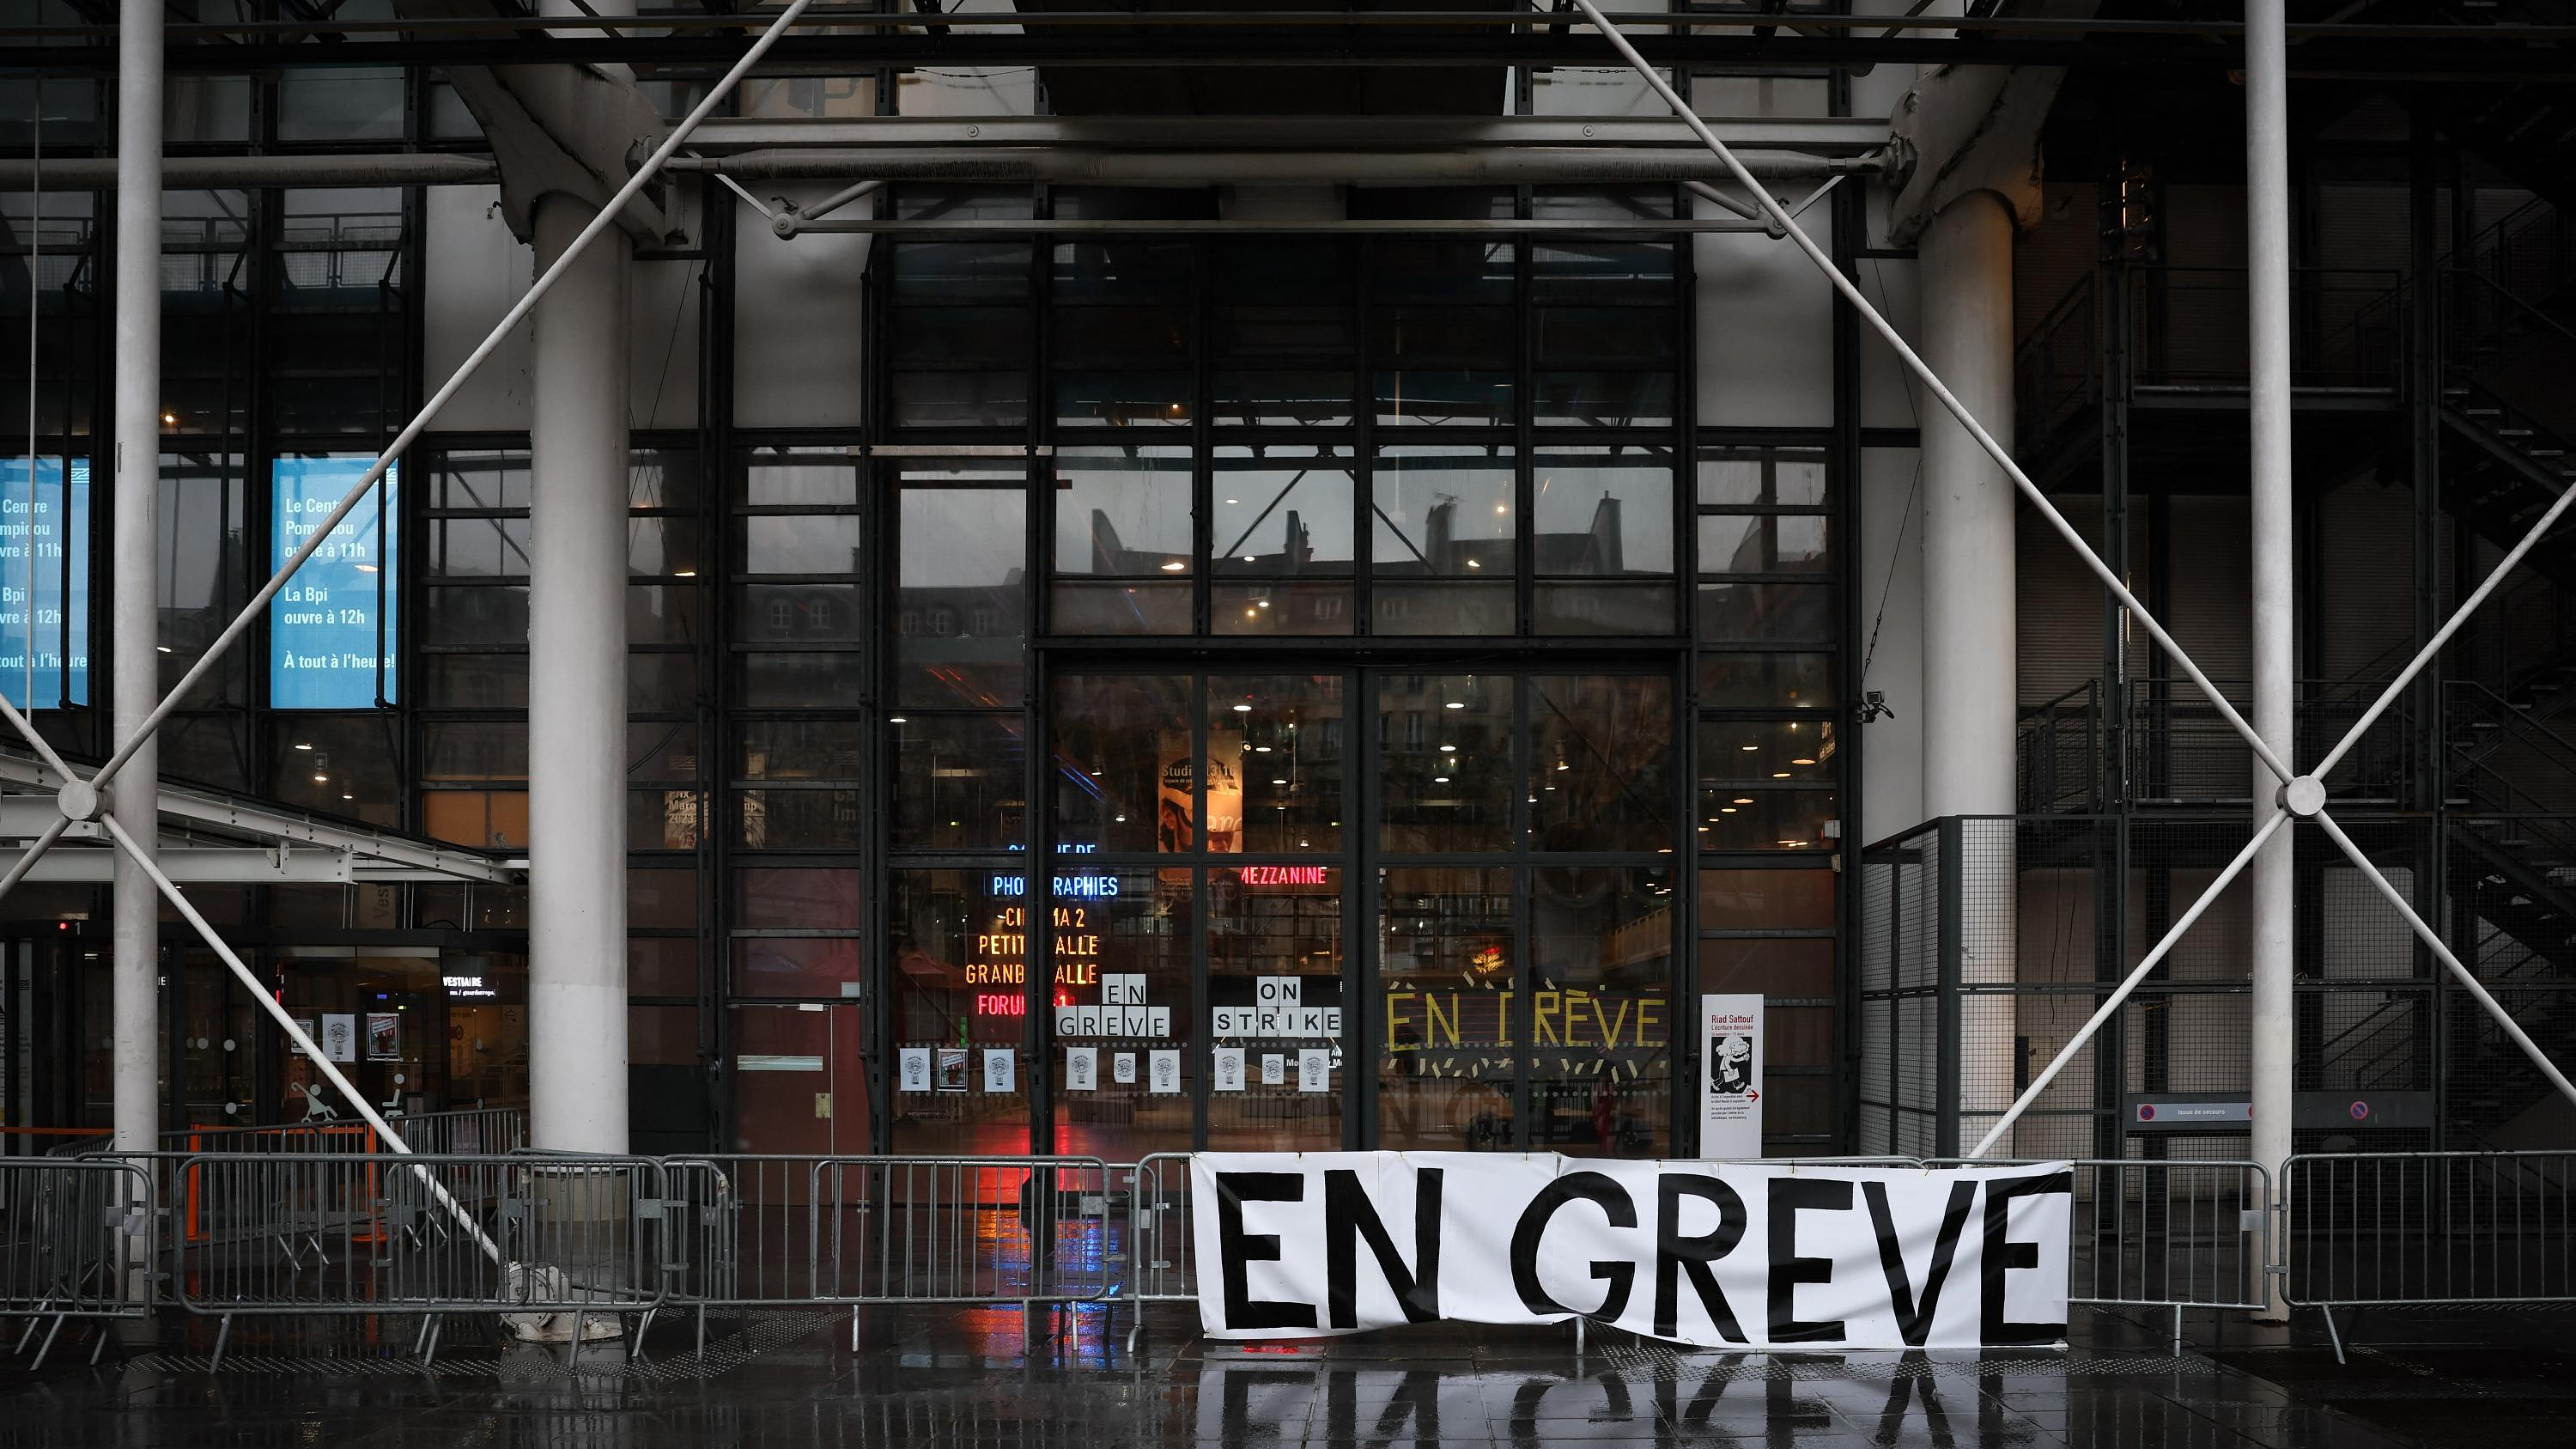 The strike at the Center Pompidou extended until February 15